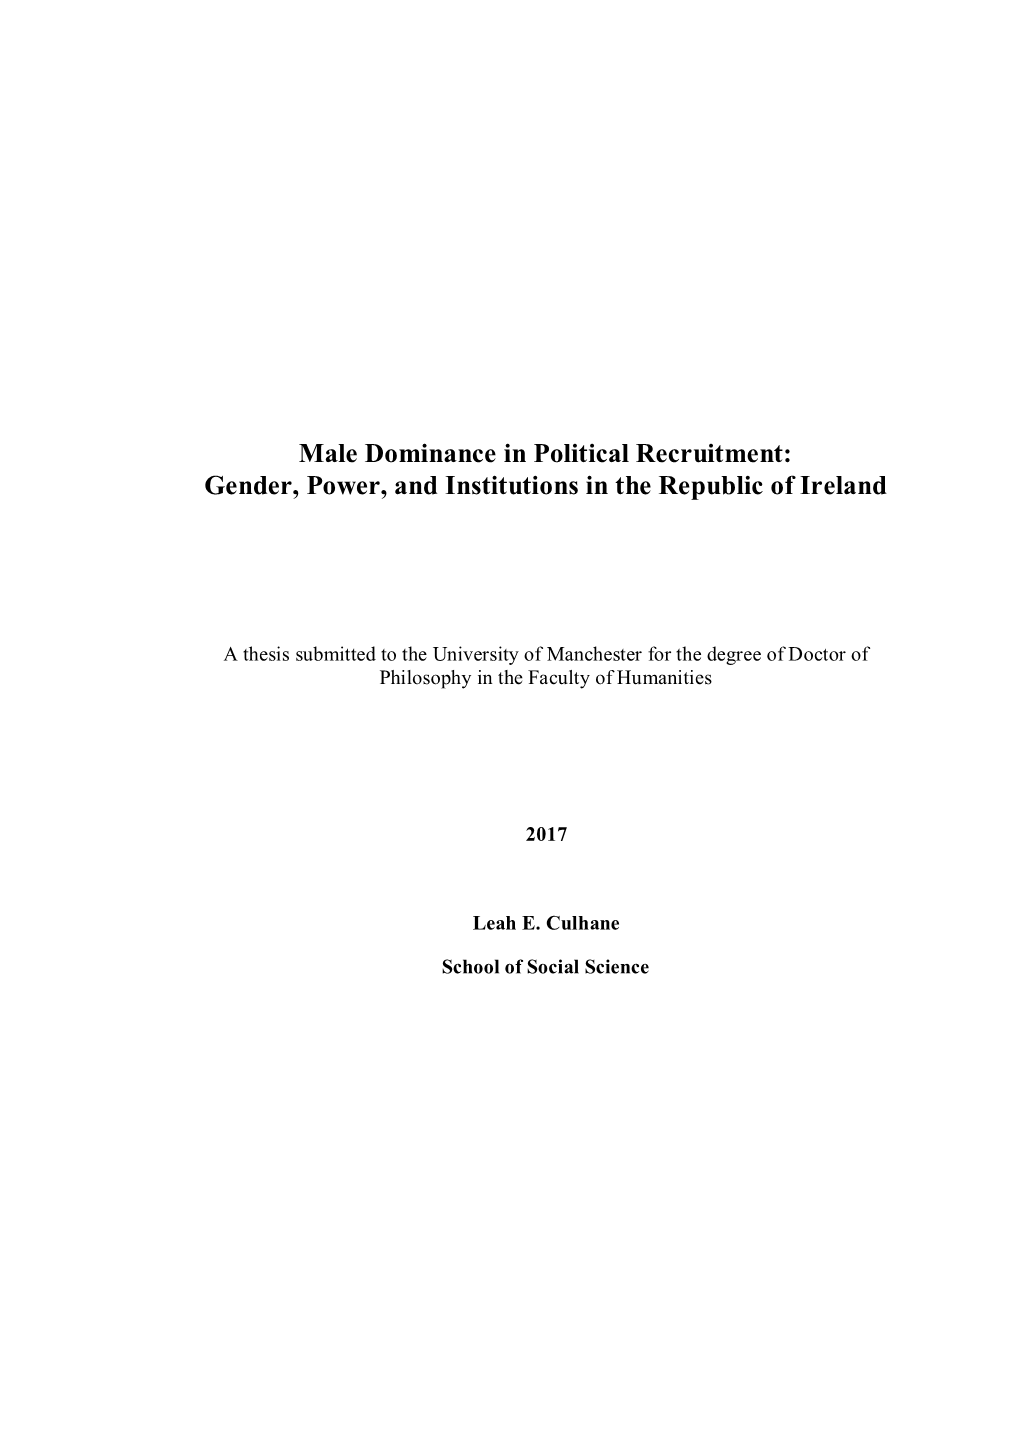 Male Dominance in Political Recruitment: Gender, Power, and Institutions in the Republic of Ireland